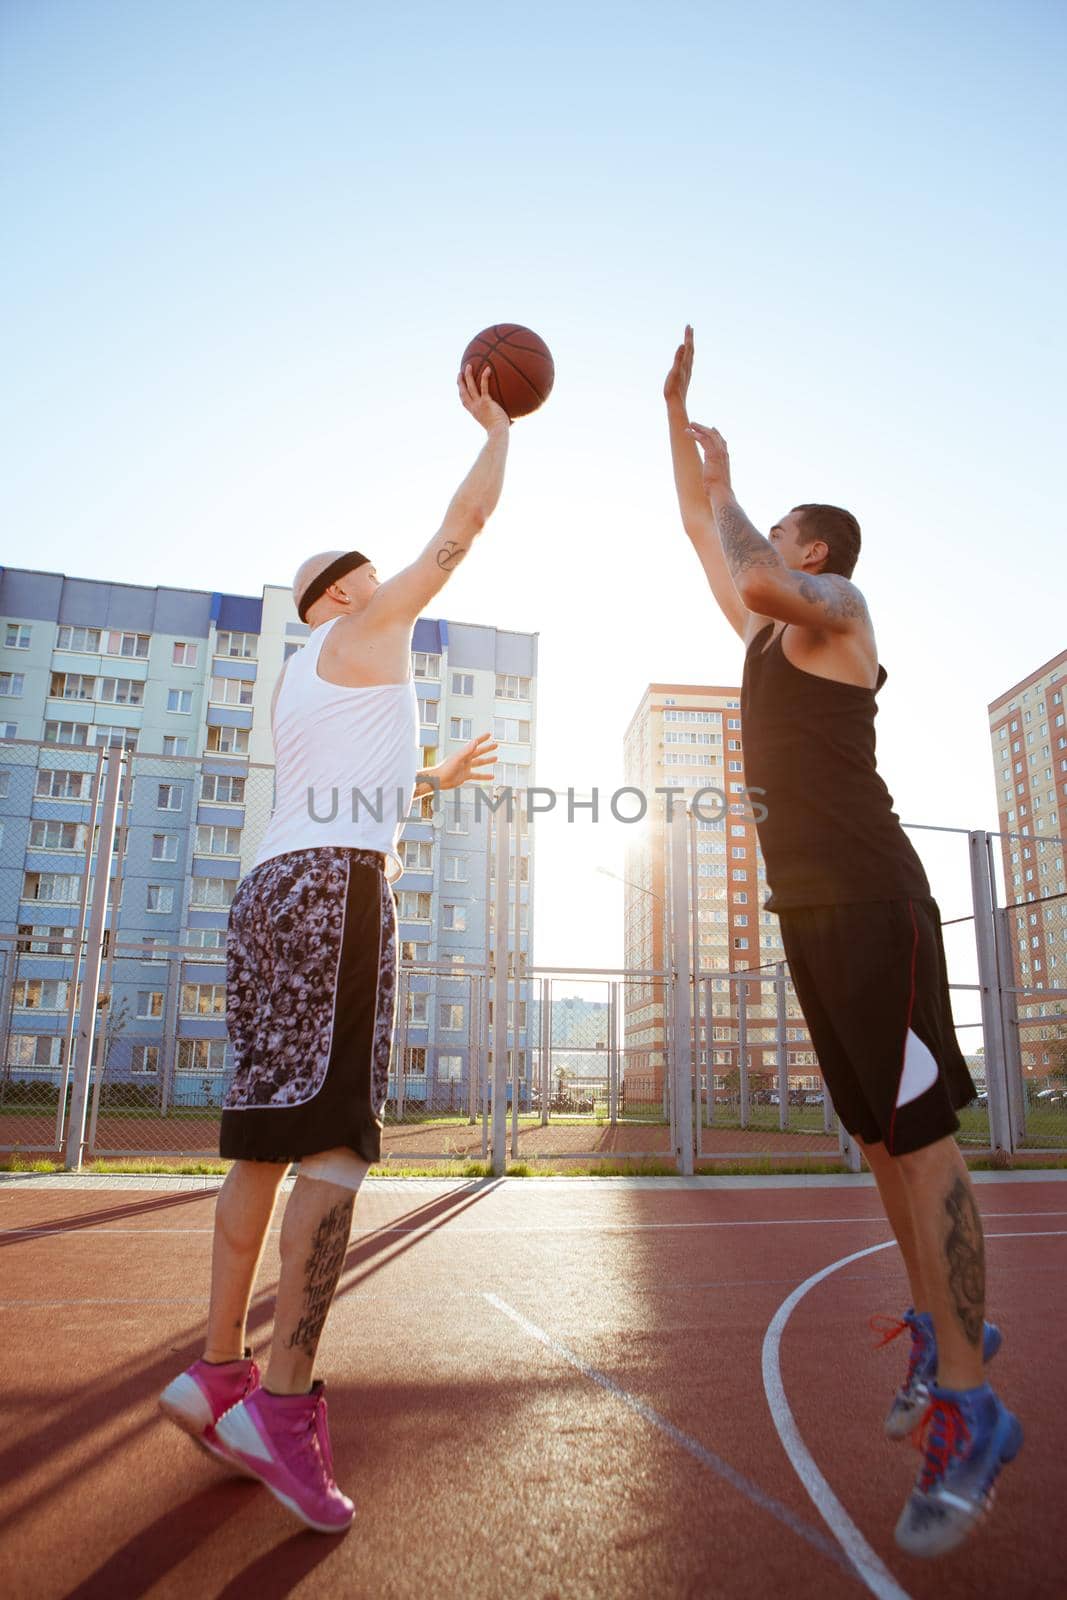 Two guys jump stretch to the ball on the basketball court.